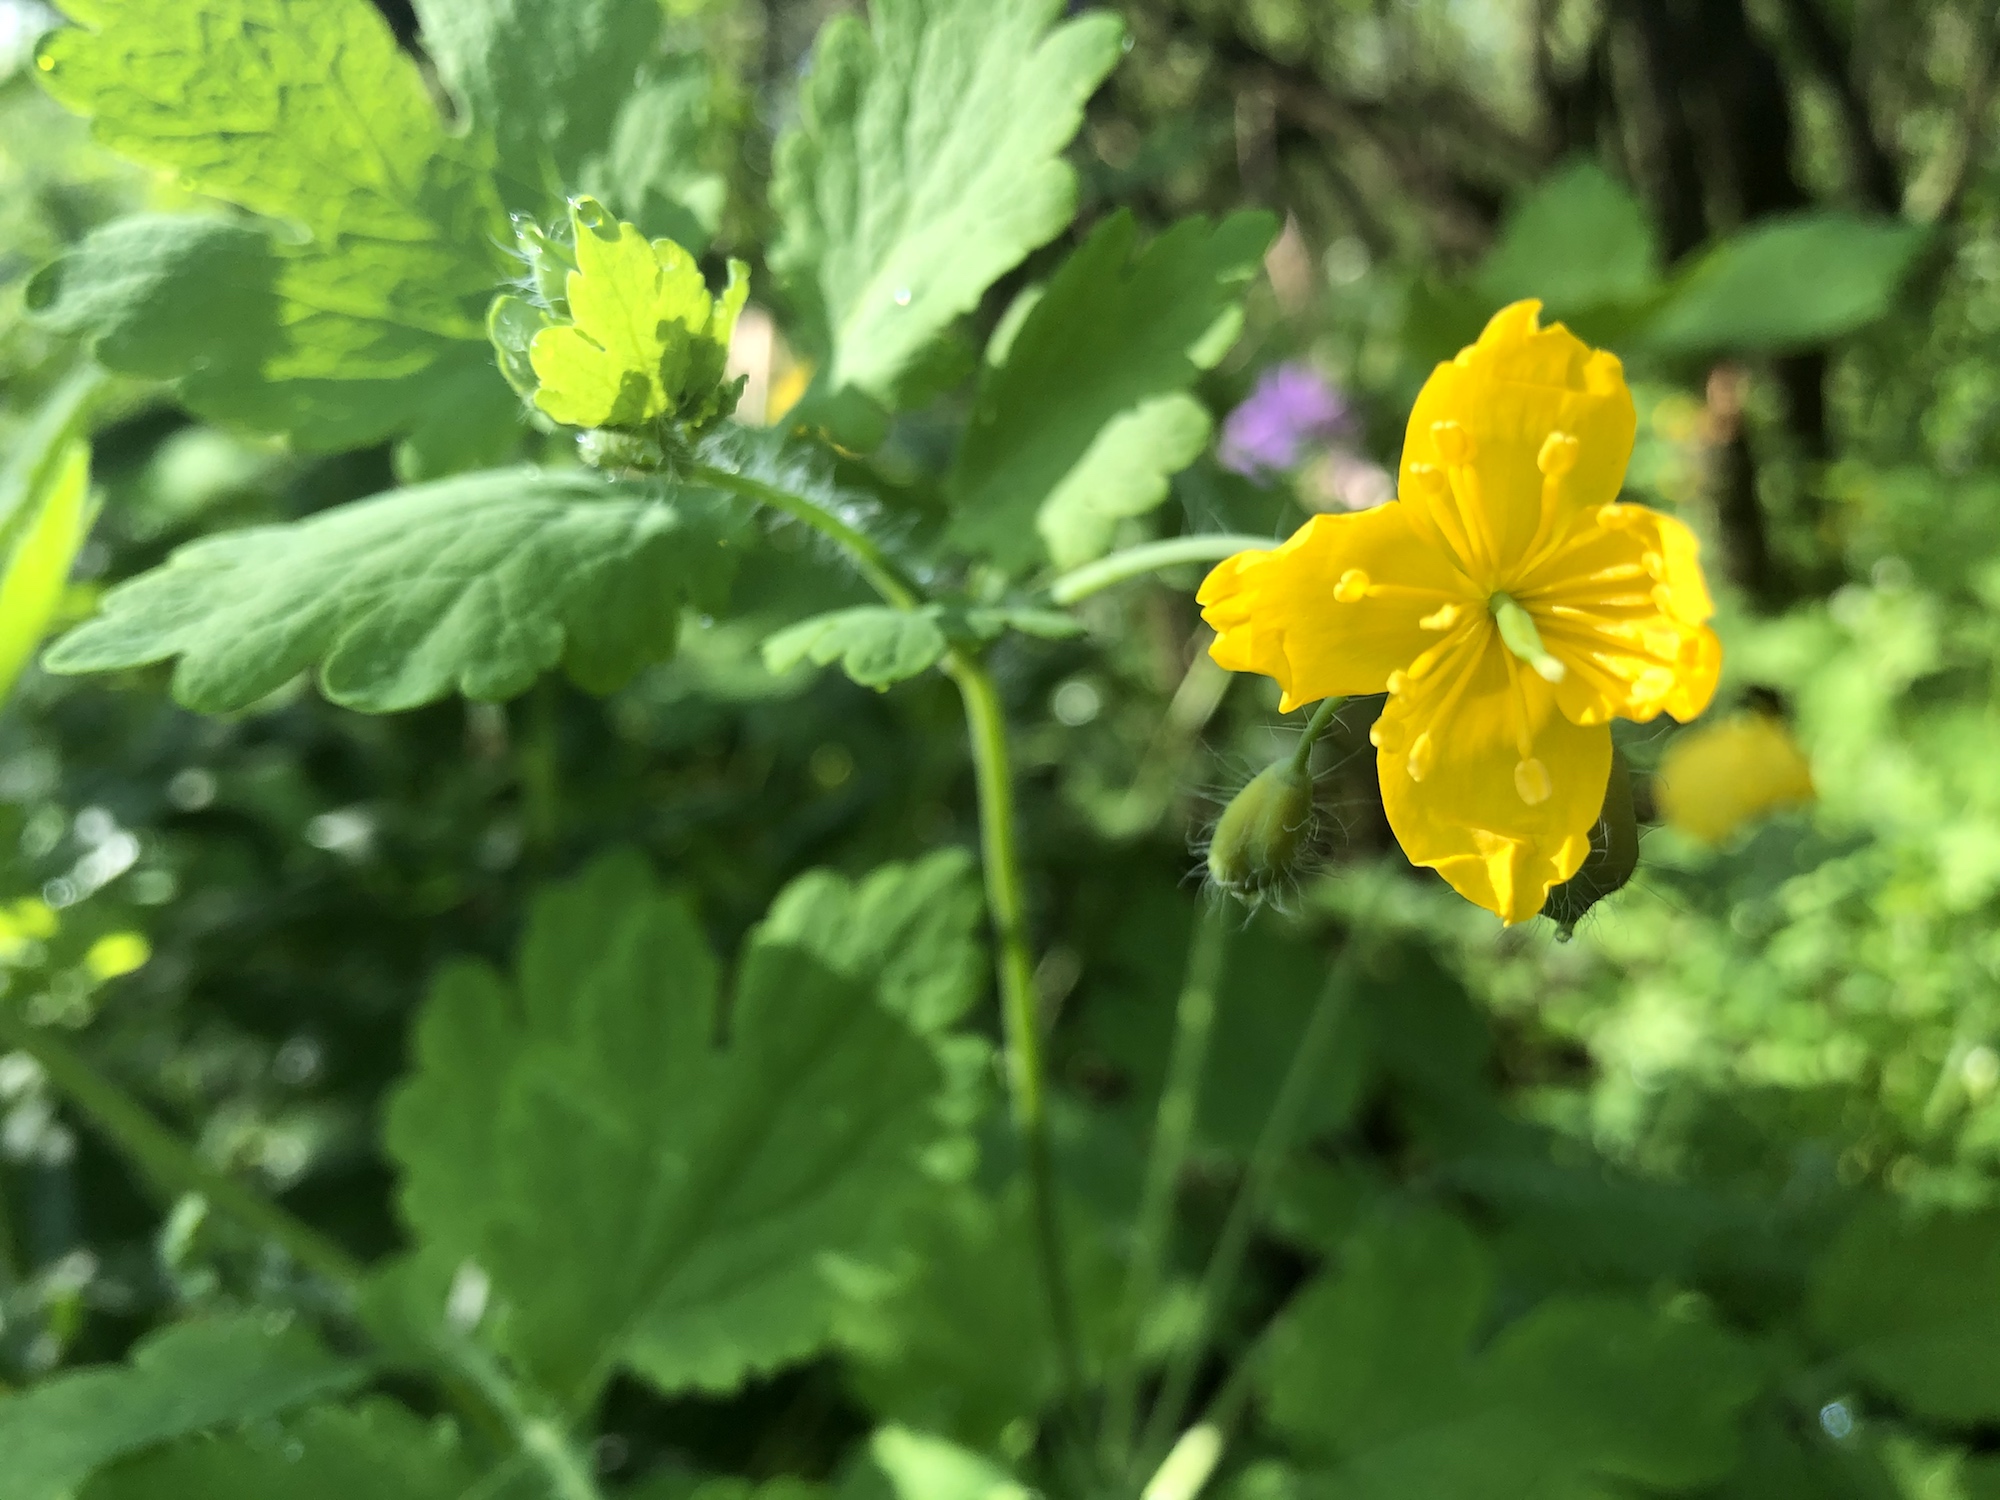 Greater Celandine by Duck Pond in Madison, Wisconsin on May 24, 2020.